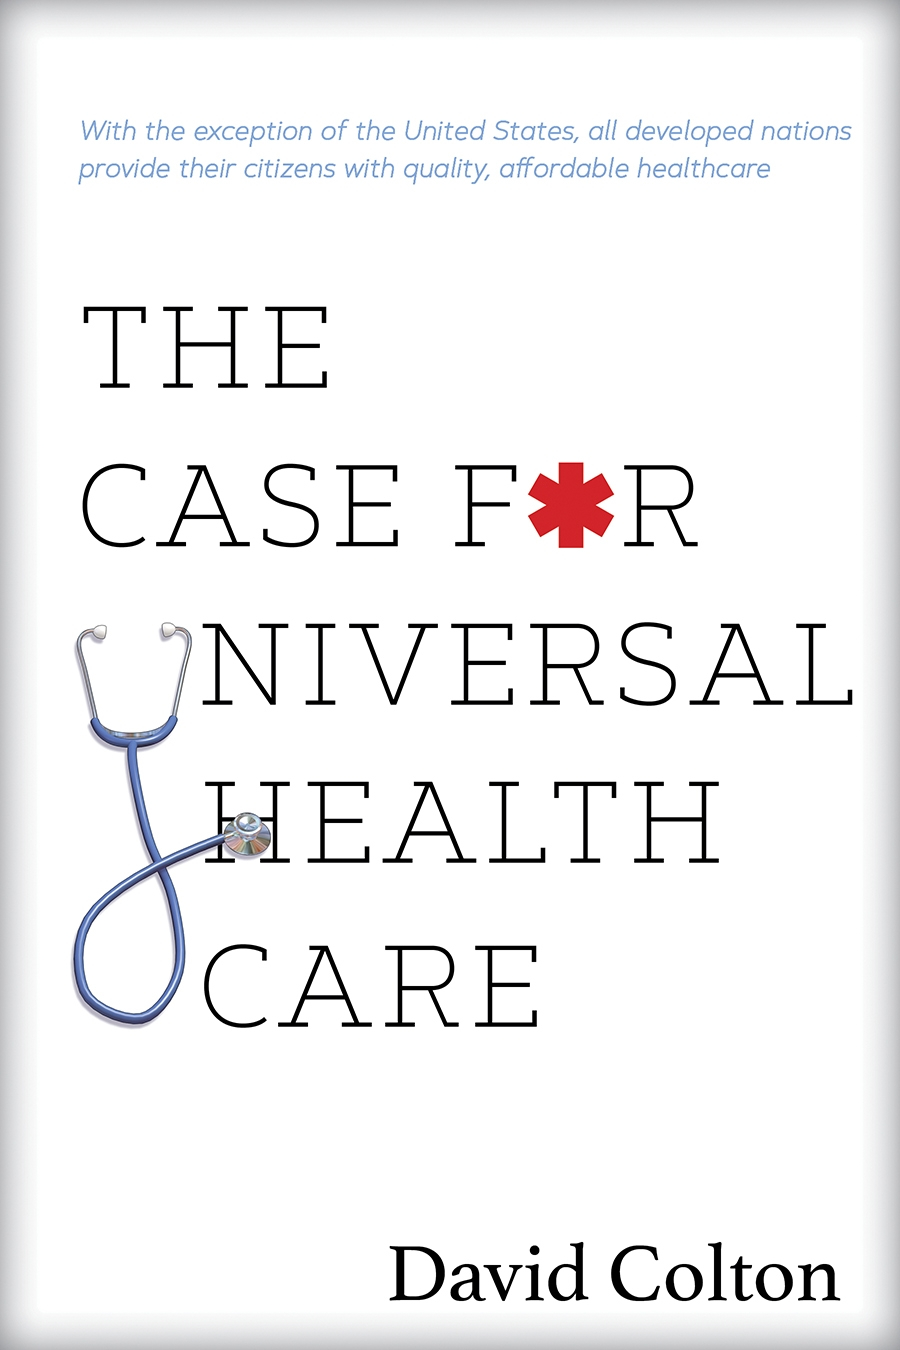 thesis for universal health care